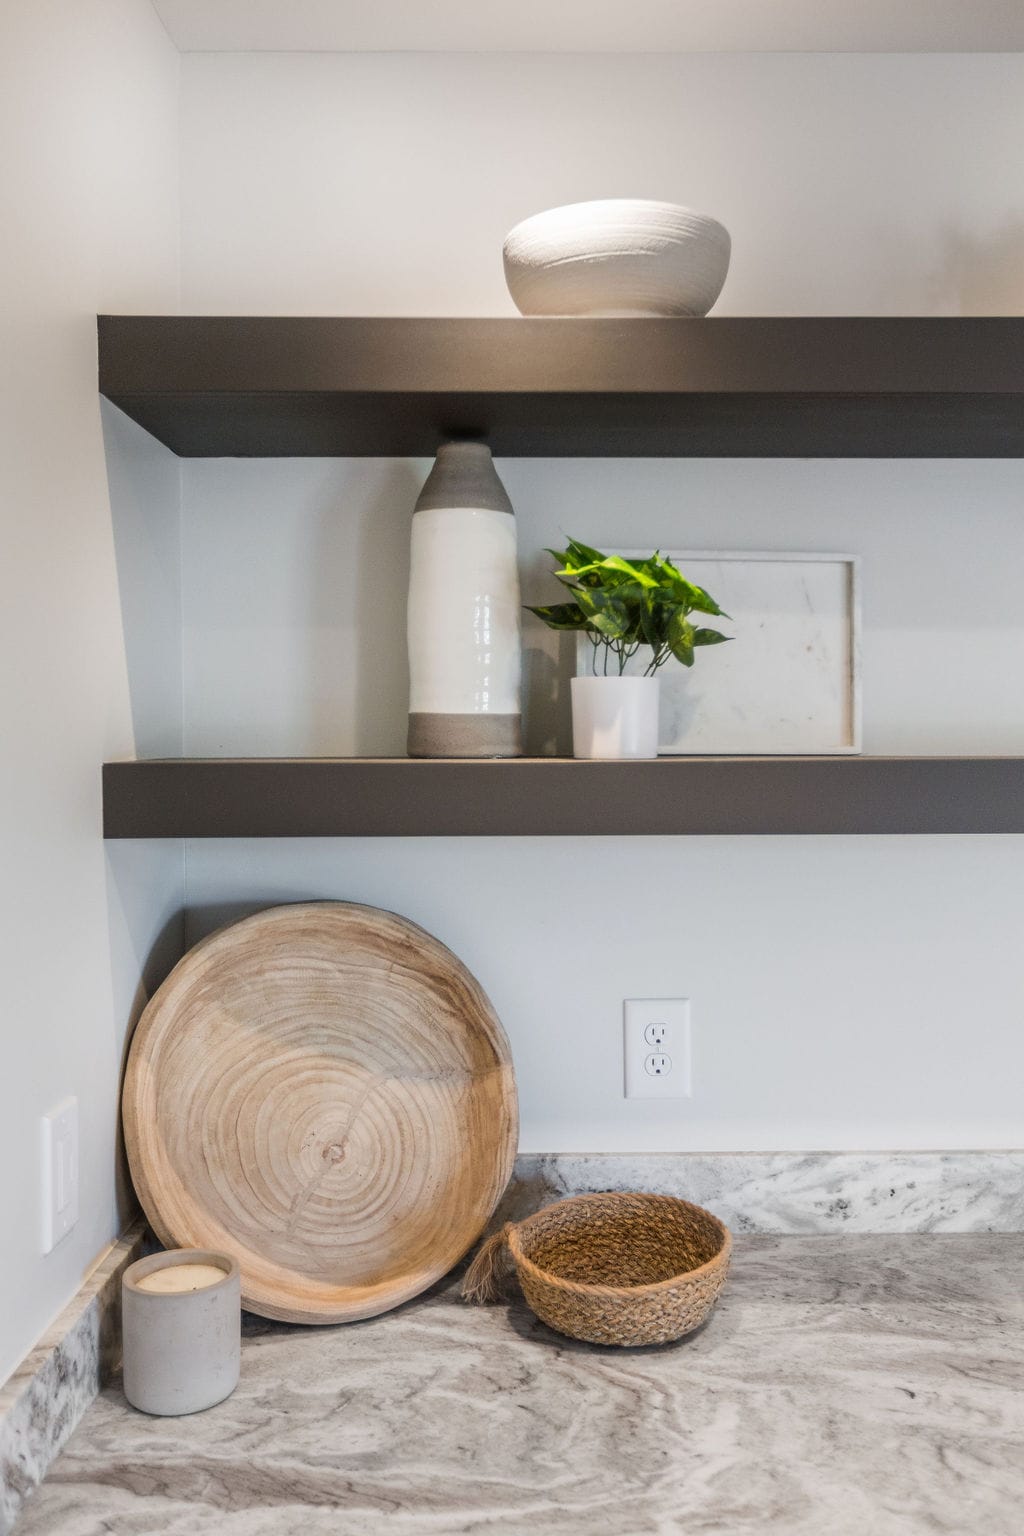 Nicholas Design Build | A kitchen with shelves and a bowl on the counter.